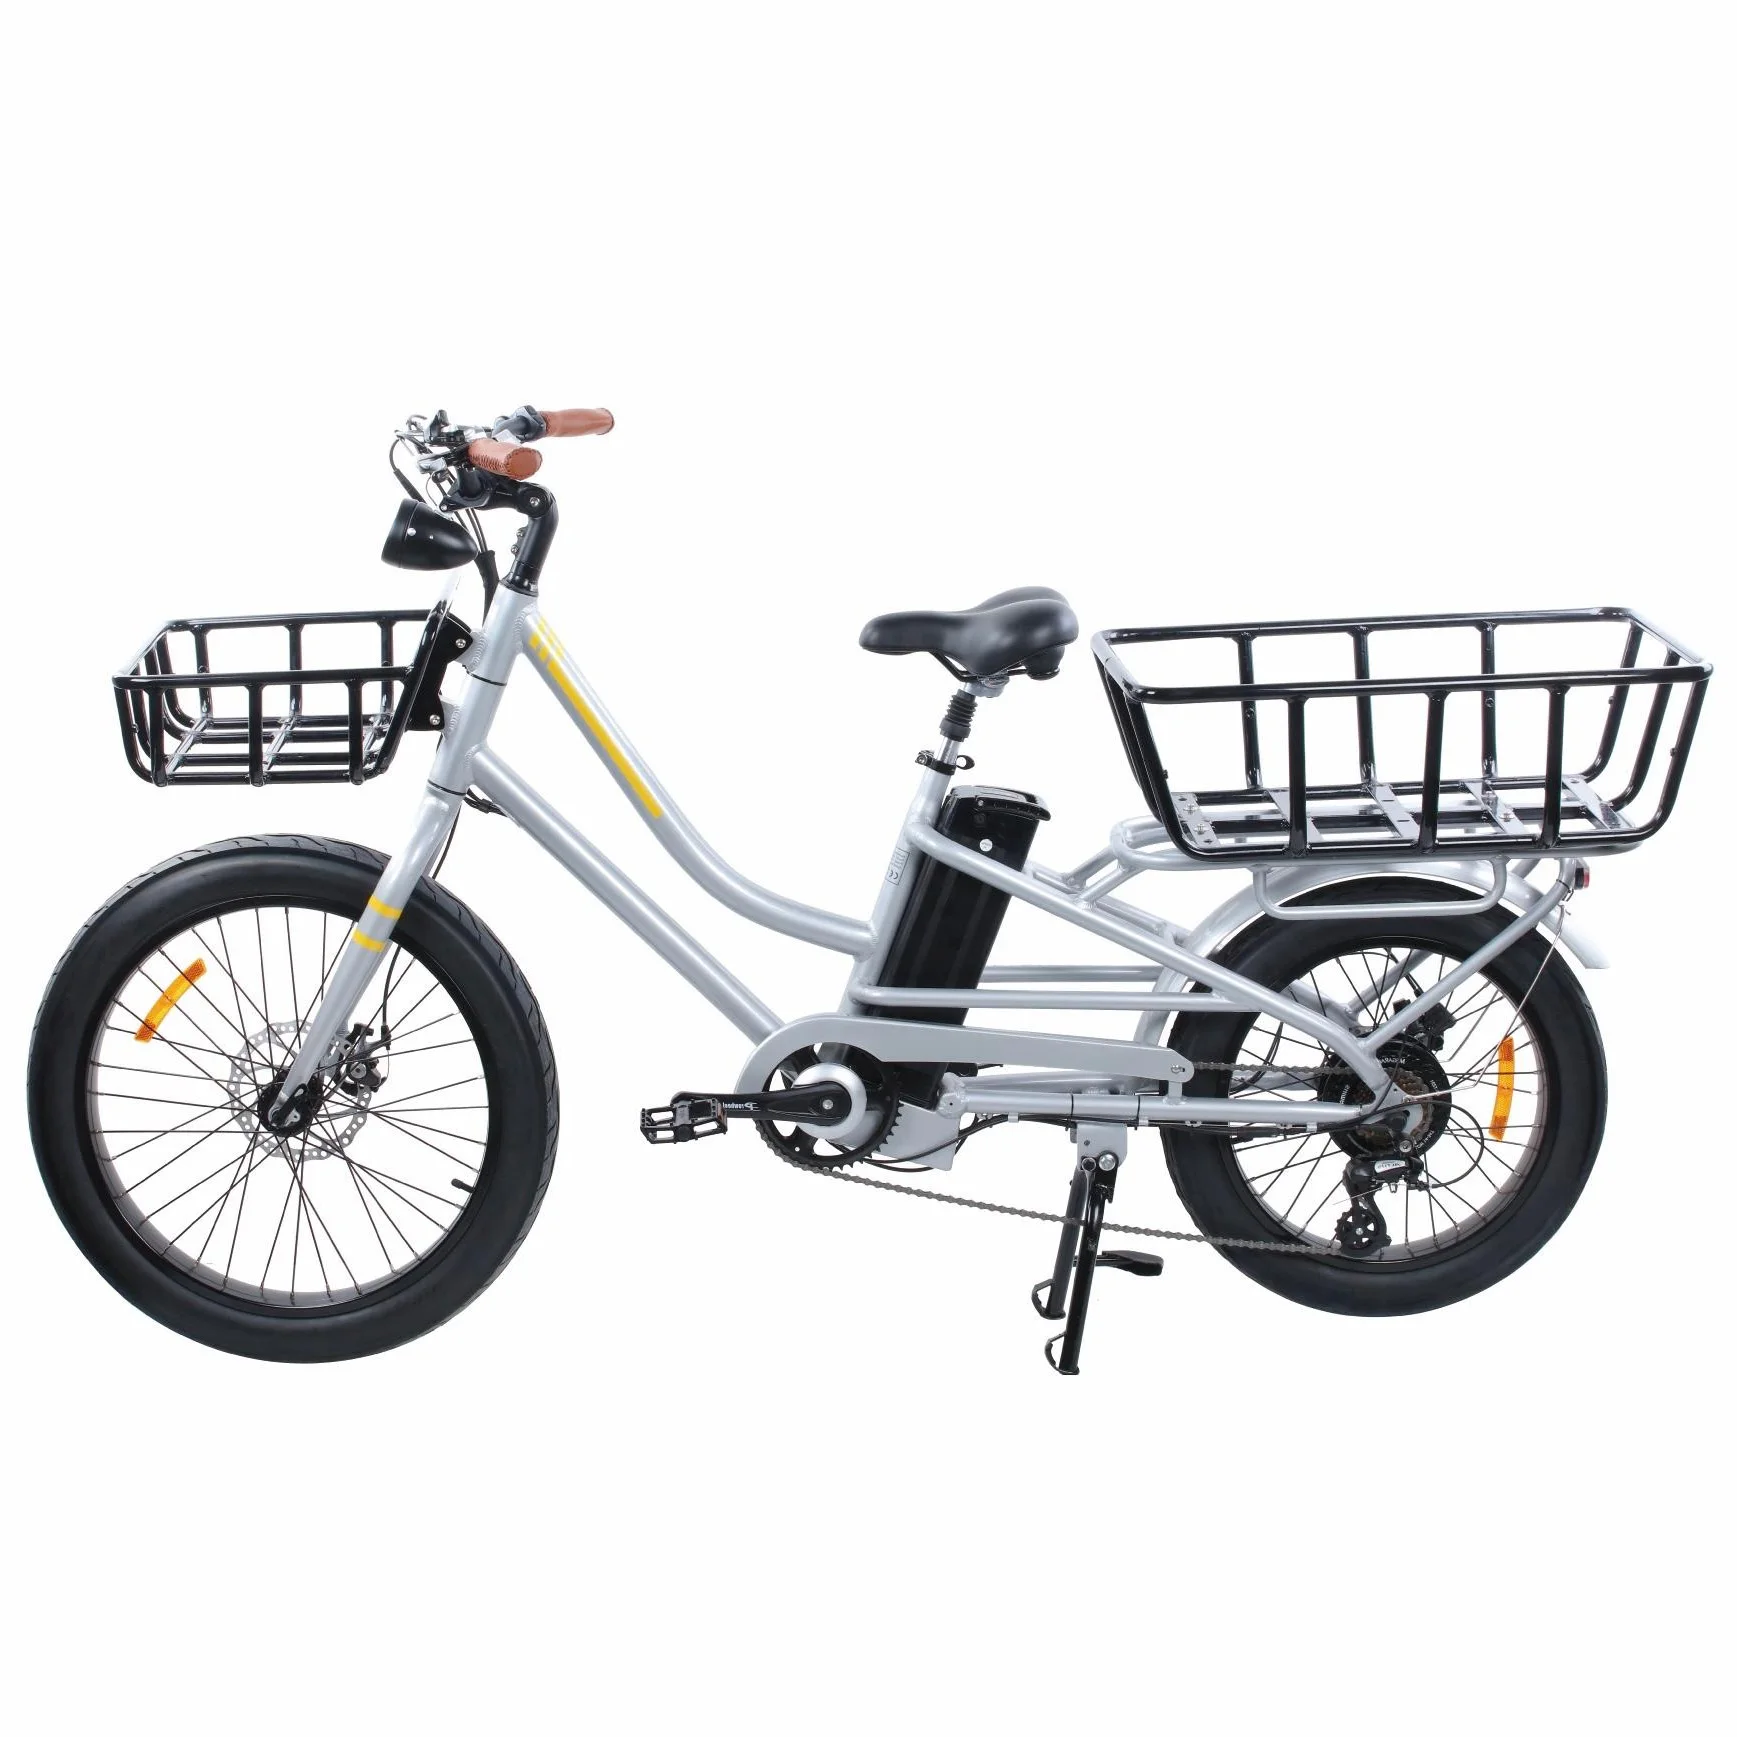 

24 Inch Tires Bicycle Electric Bike 36V 350W 13AH 6S Aluminum Alloy Frame Electric Bike Motorcycles